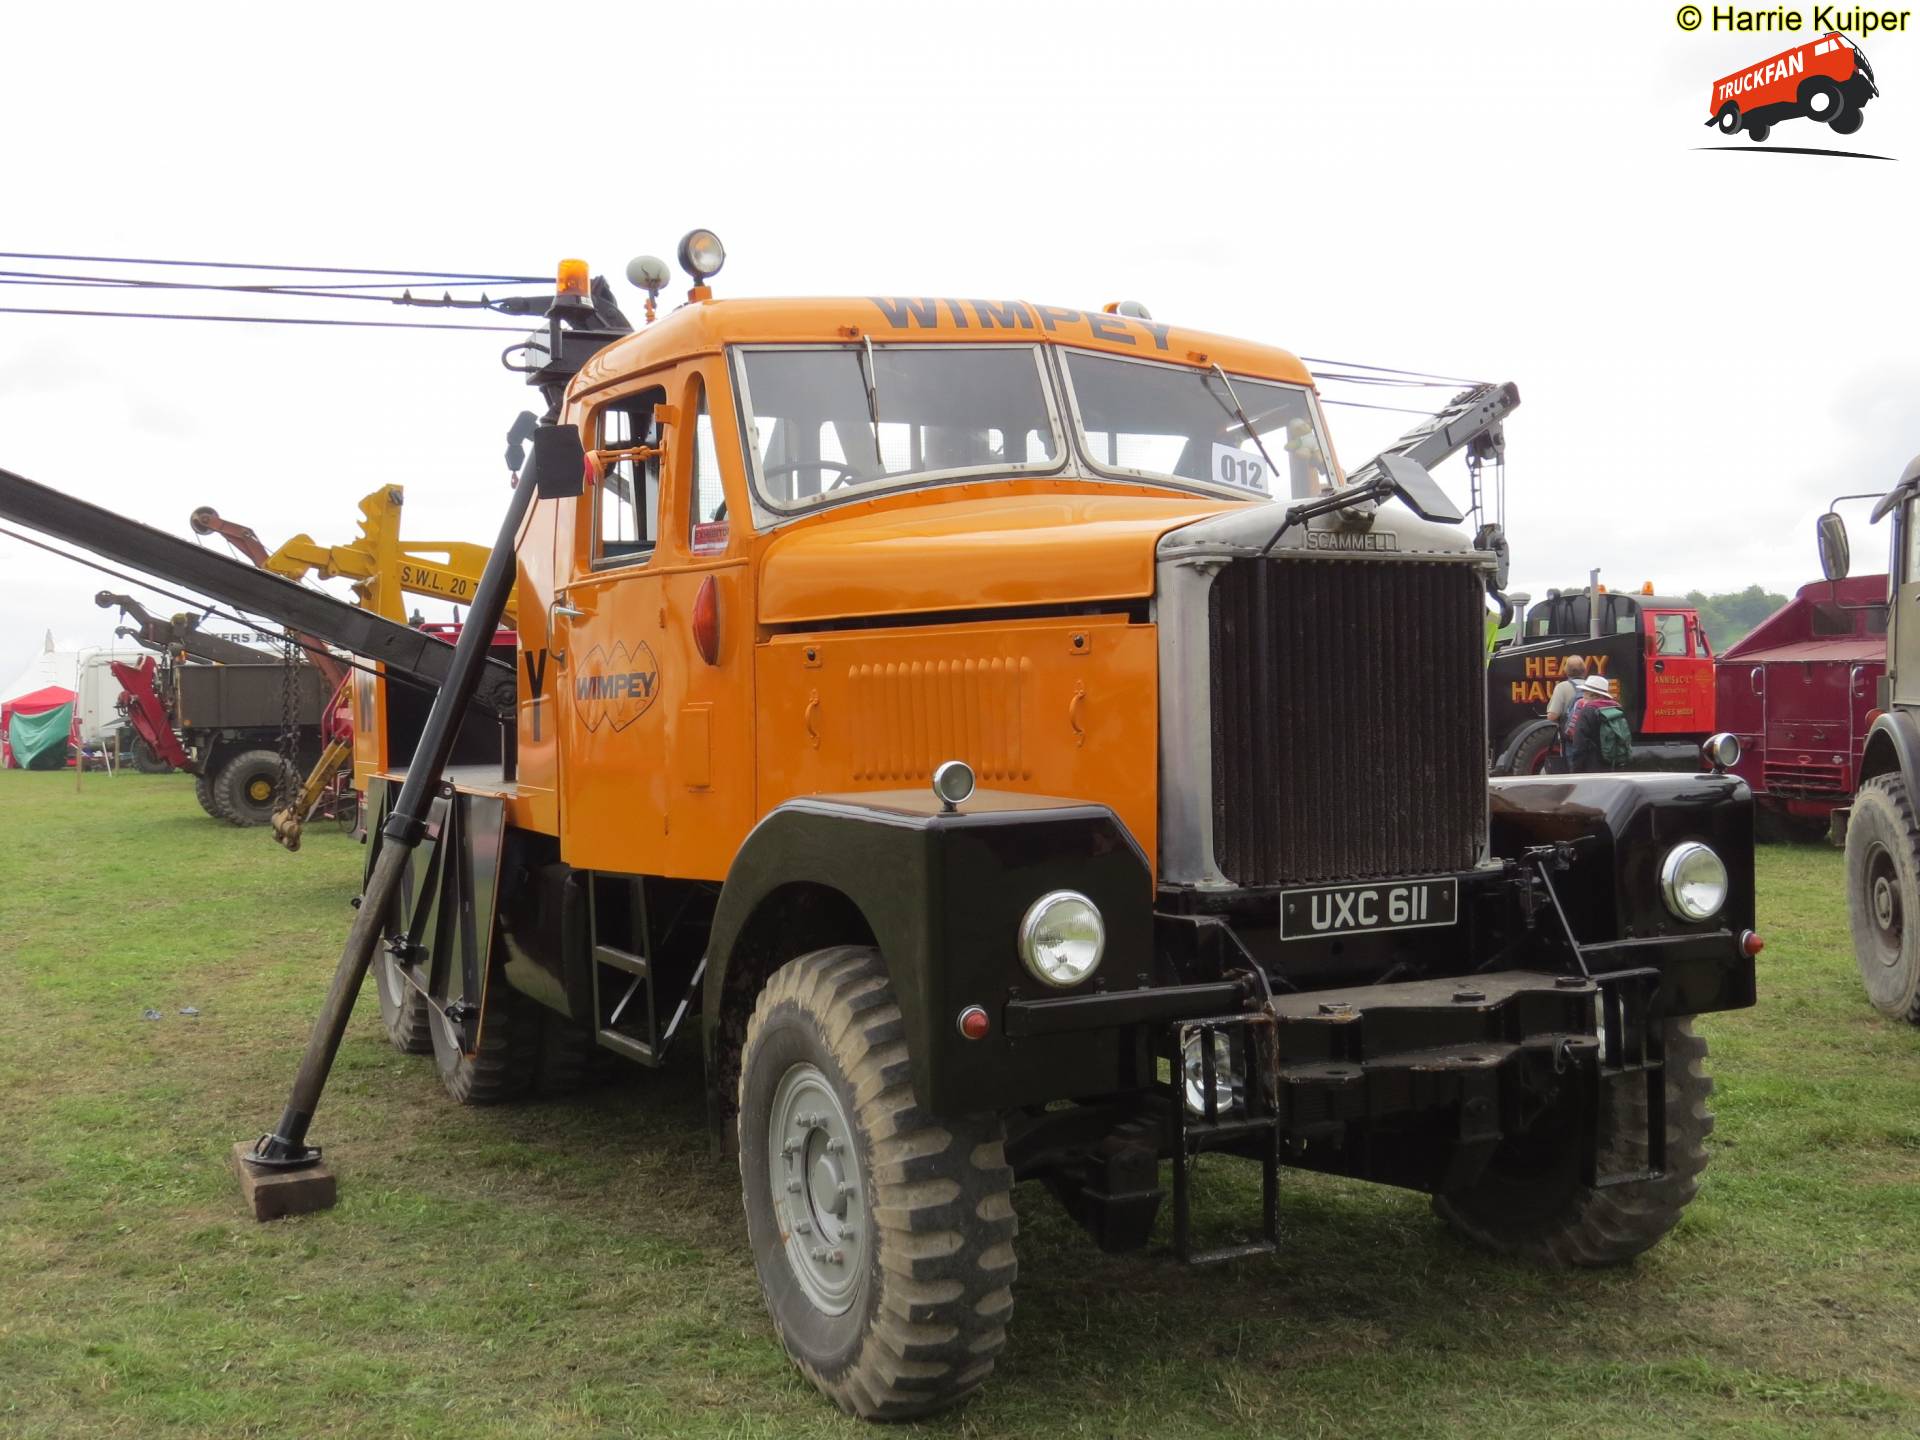 Scammell Constructor